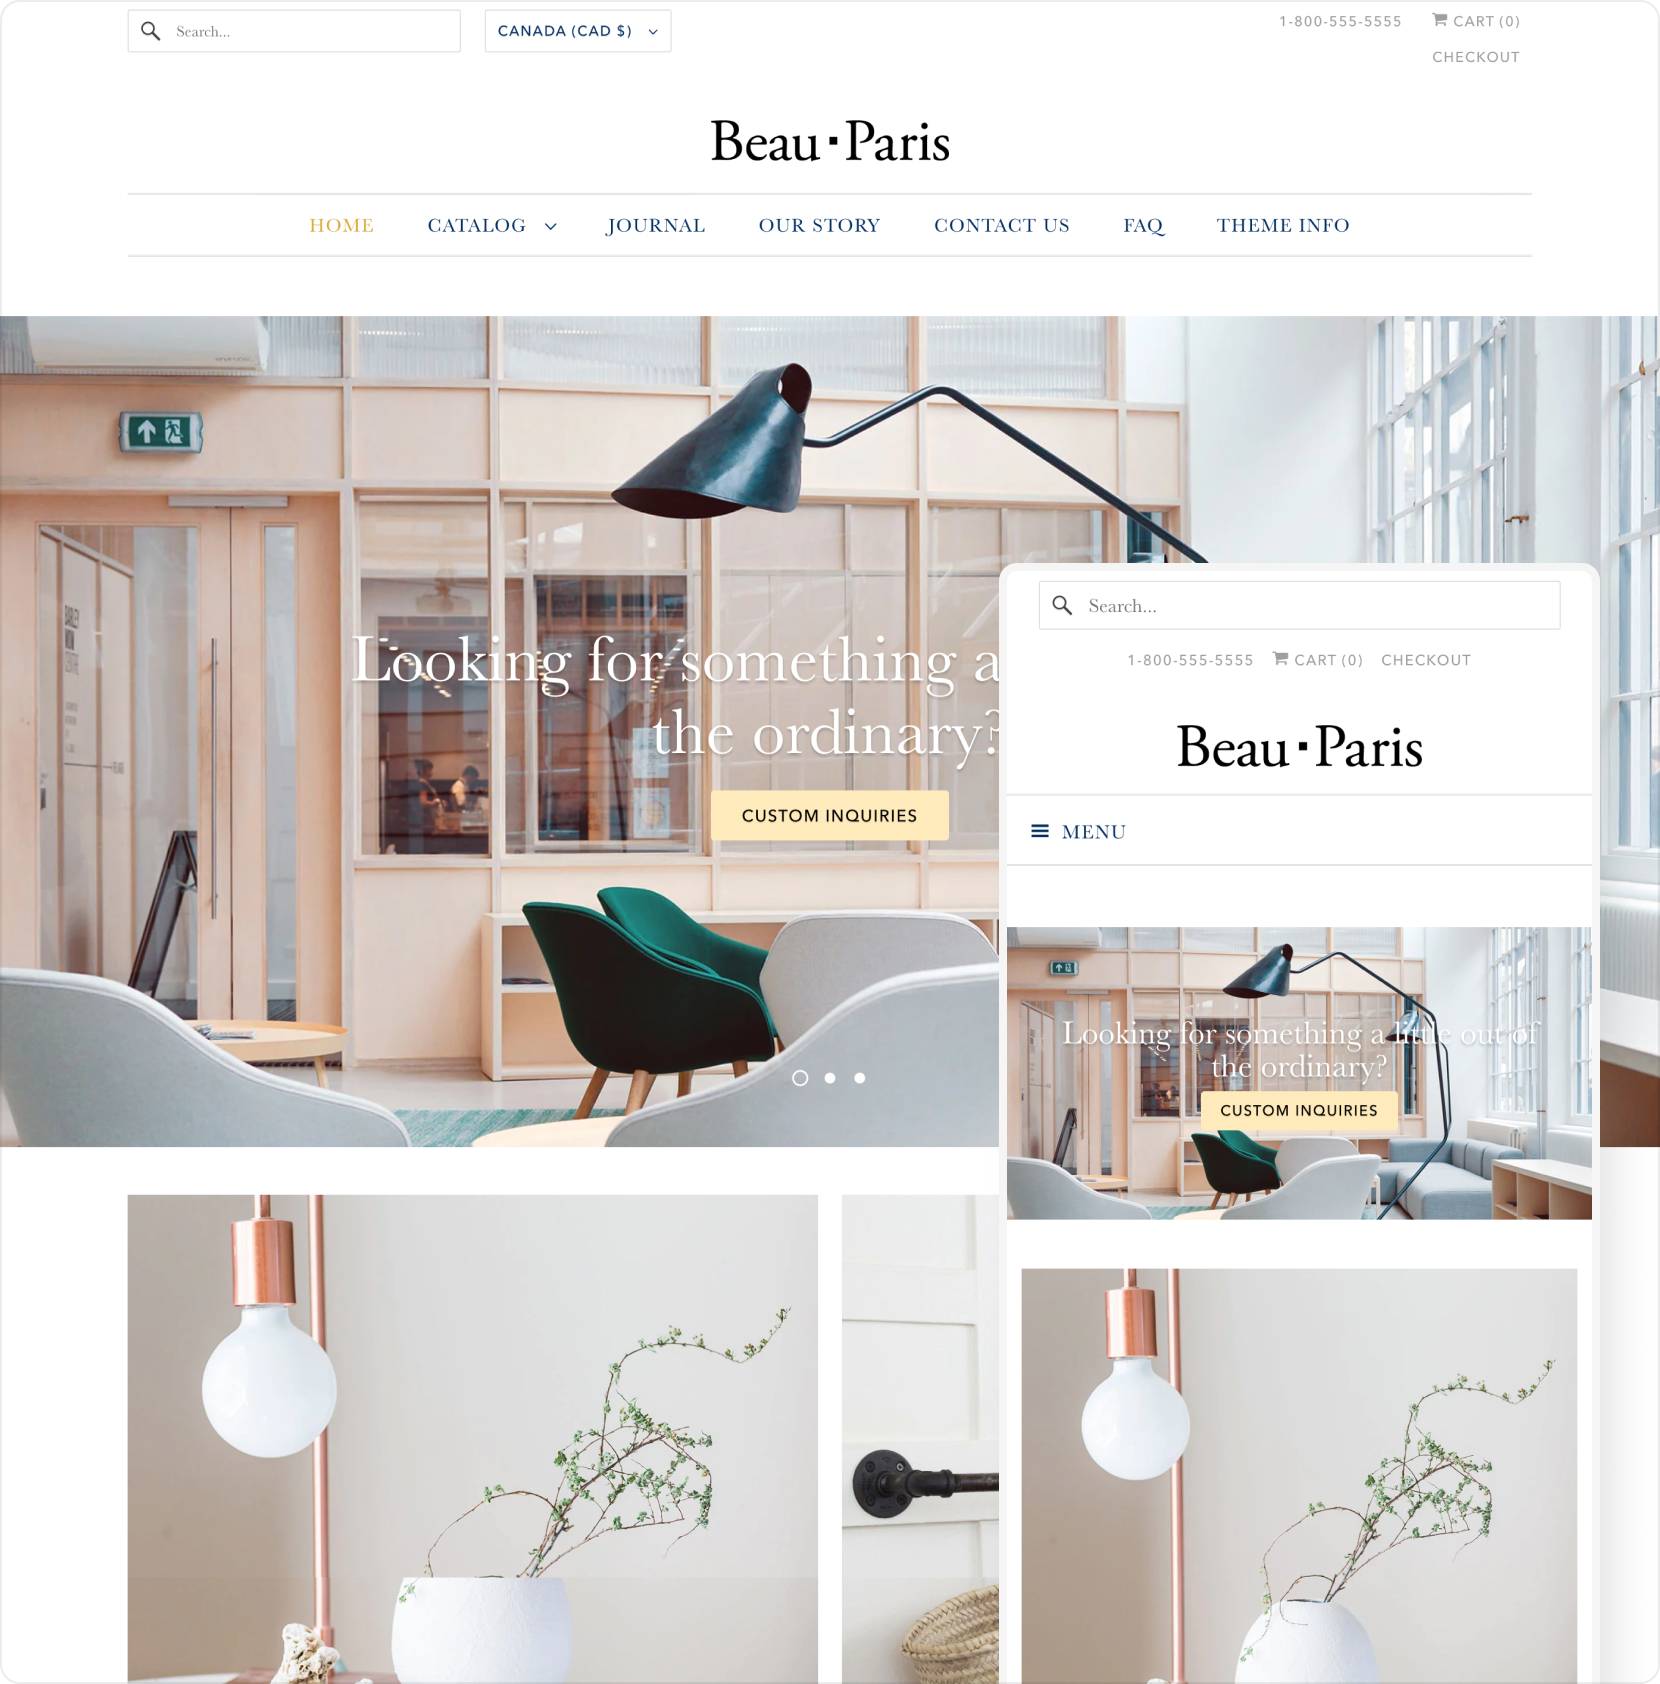 responsive shopify theme paris theme style home page shown desktop and mobile devices